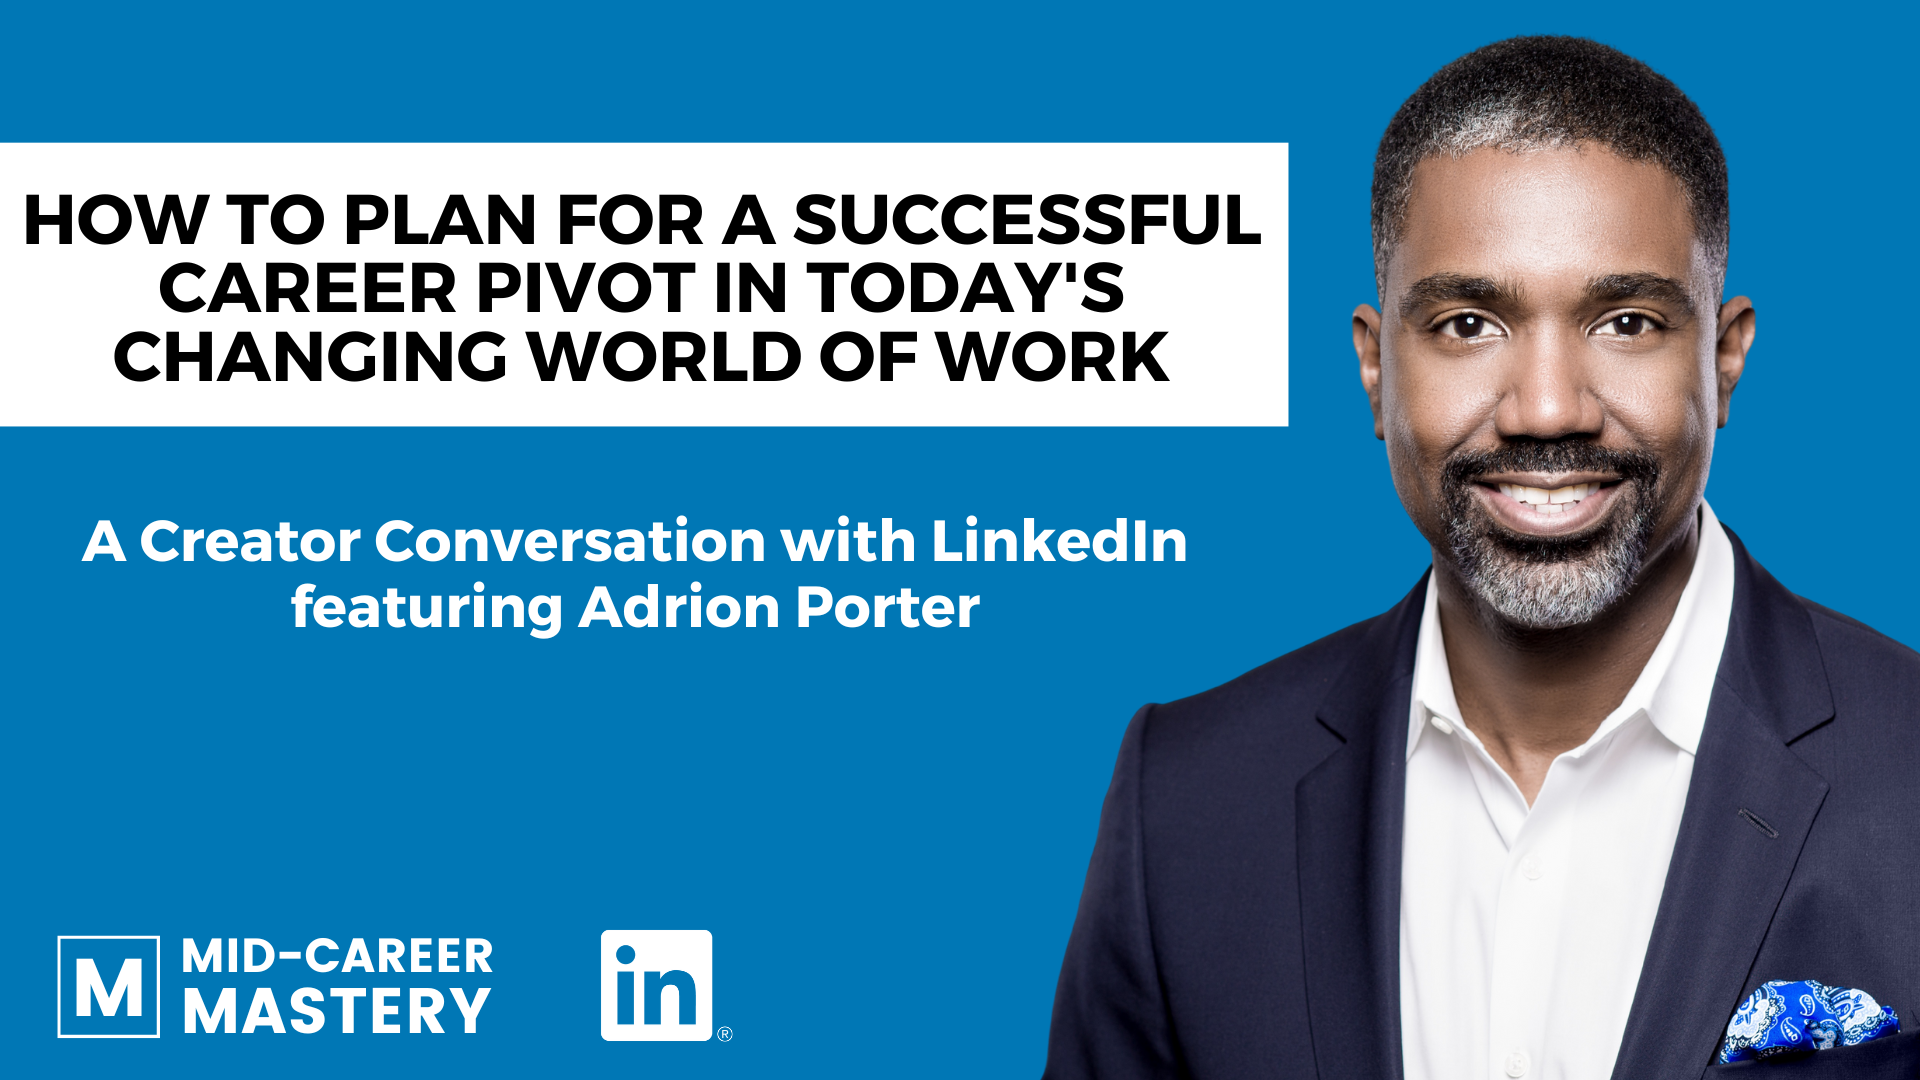 A Conversation with LinkedIn on How to Plan for a Successful Career Pivot in Today’s World of Work